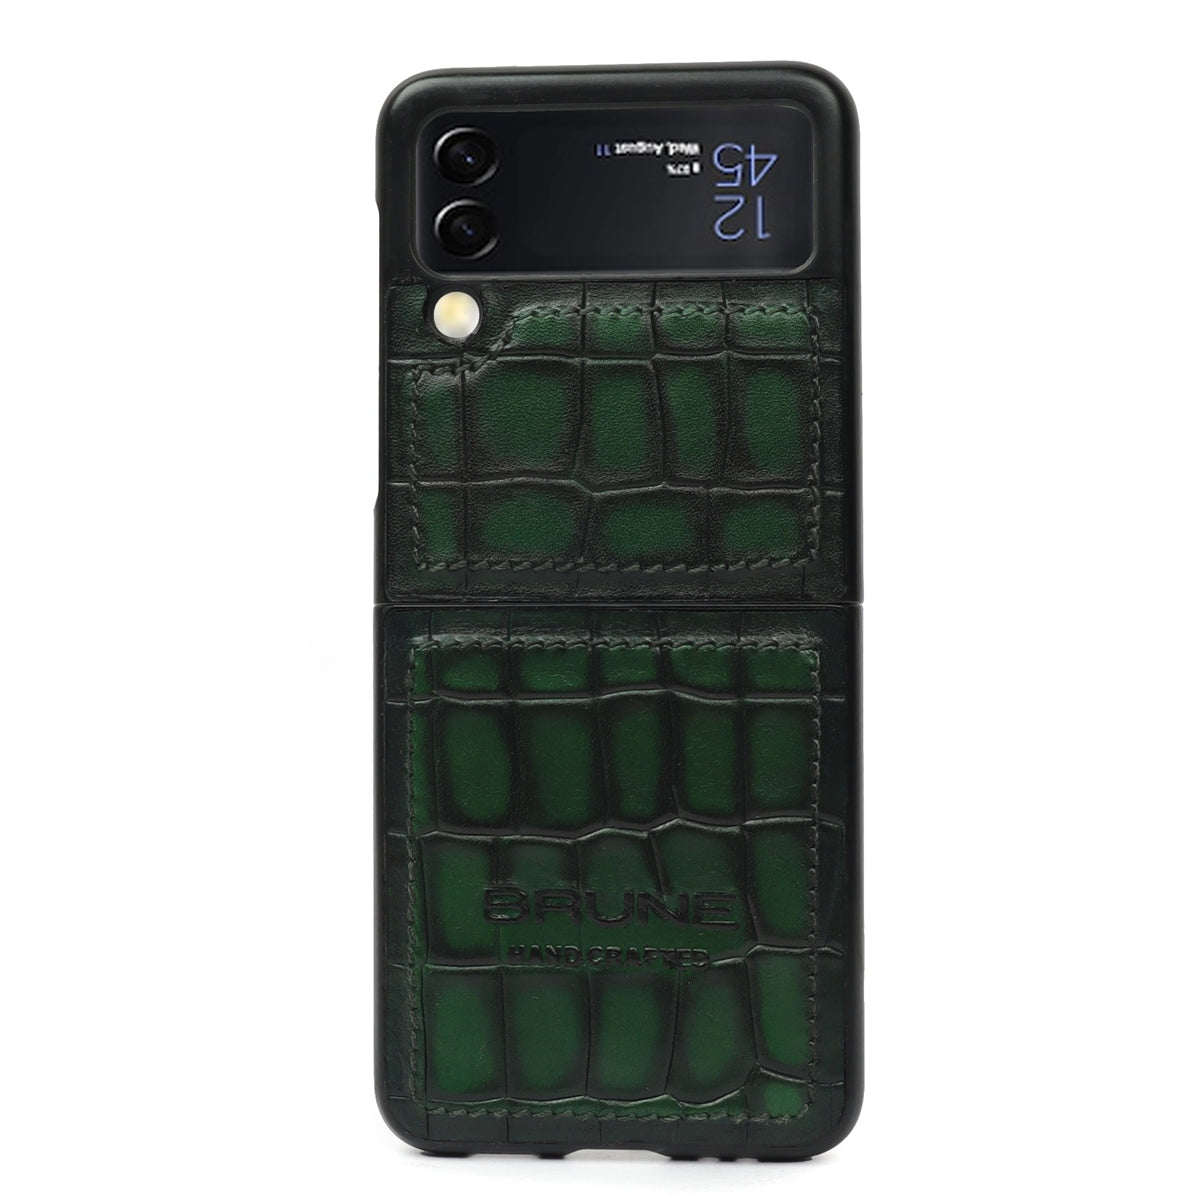 Samsung Galaxy Flip Series Green Deep Croco Textured Leather Mobile Cover by Brune & Bareskin